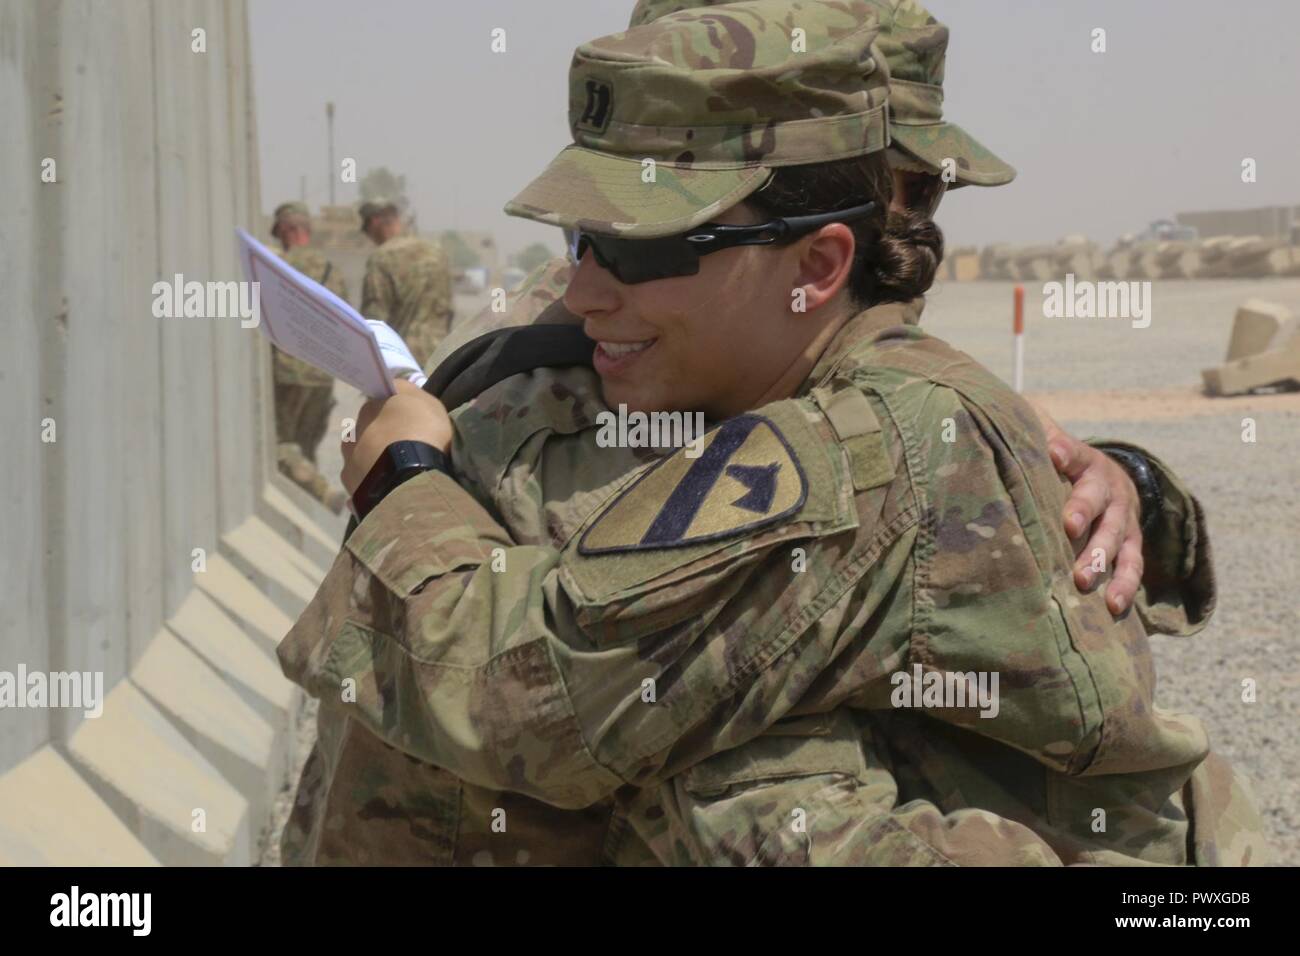 U.S. Army Capt. Kaitlin Whitmore, commander of Charlie Company, 215th Brigade Support Battalion, 3rd Armored Brigade Combat Team, 1st Cavalry Division, hugs her brother, U.S. Army Capt. Scott Rayburn, commander of Alpha Company, 37th Engineer Battalion, 2nd Brigade Combat Team, 82nd Airborne Division, at his change-of-command ceremony in Qayyarah West Airfield, Iraq, July 1, 2017. The siblings, who hail from Gainesville, Florida, both attended ROTC in college and were even commissioned during the same week in 2011. Stock Photo